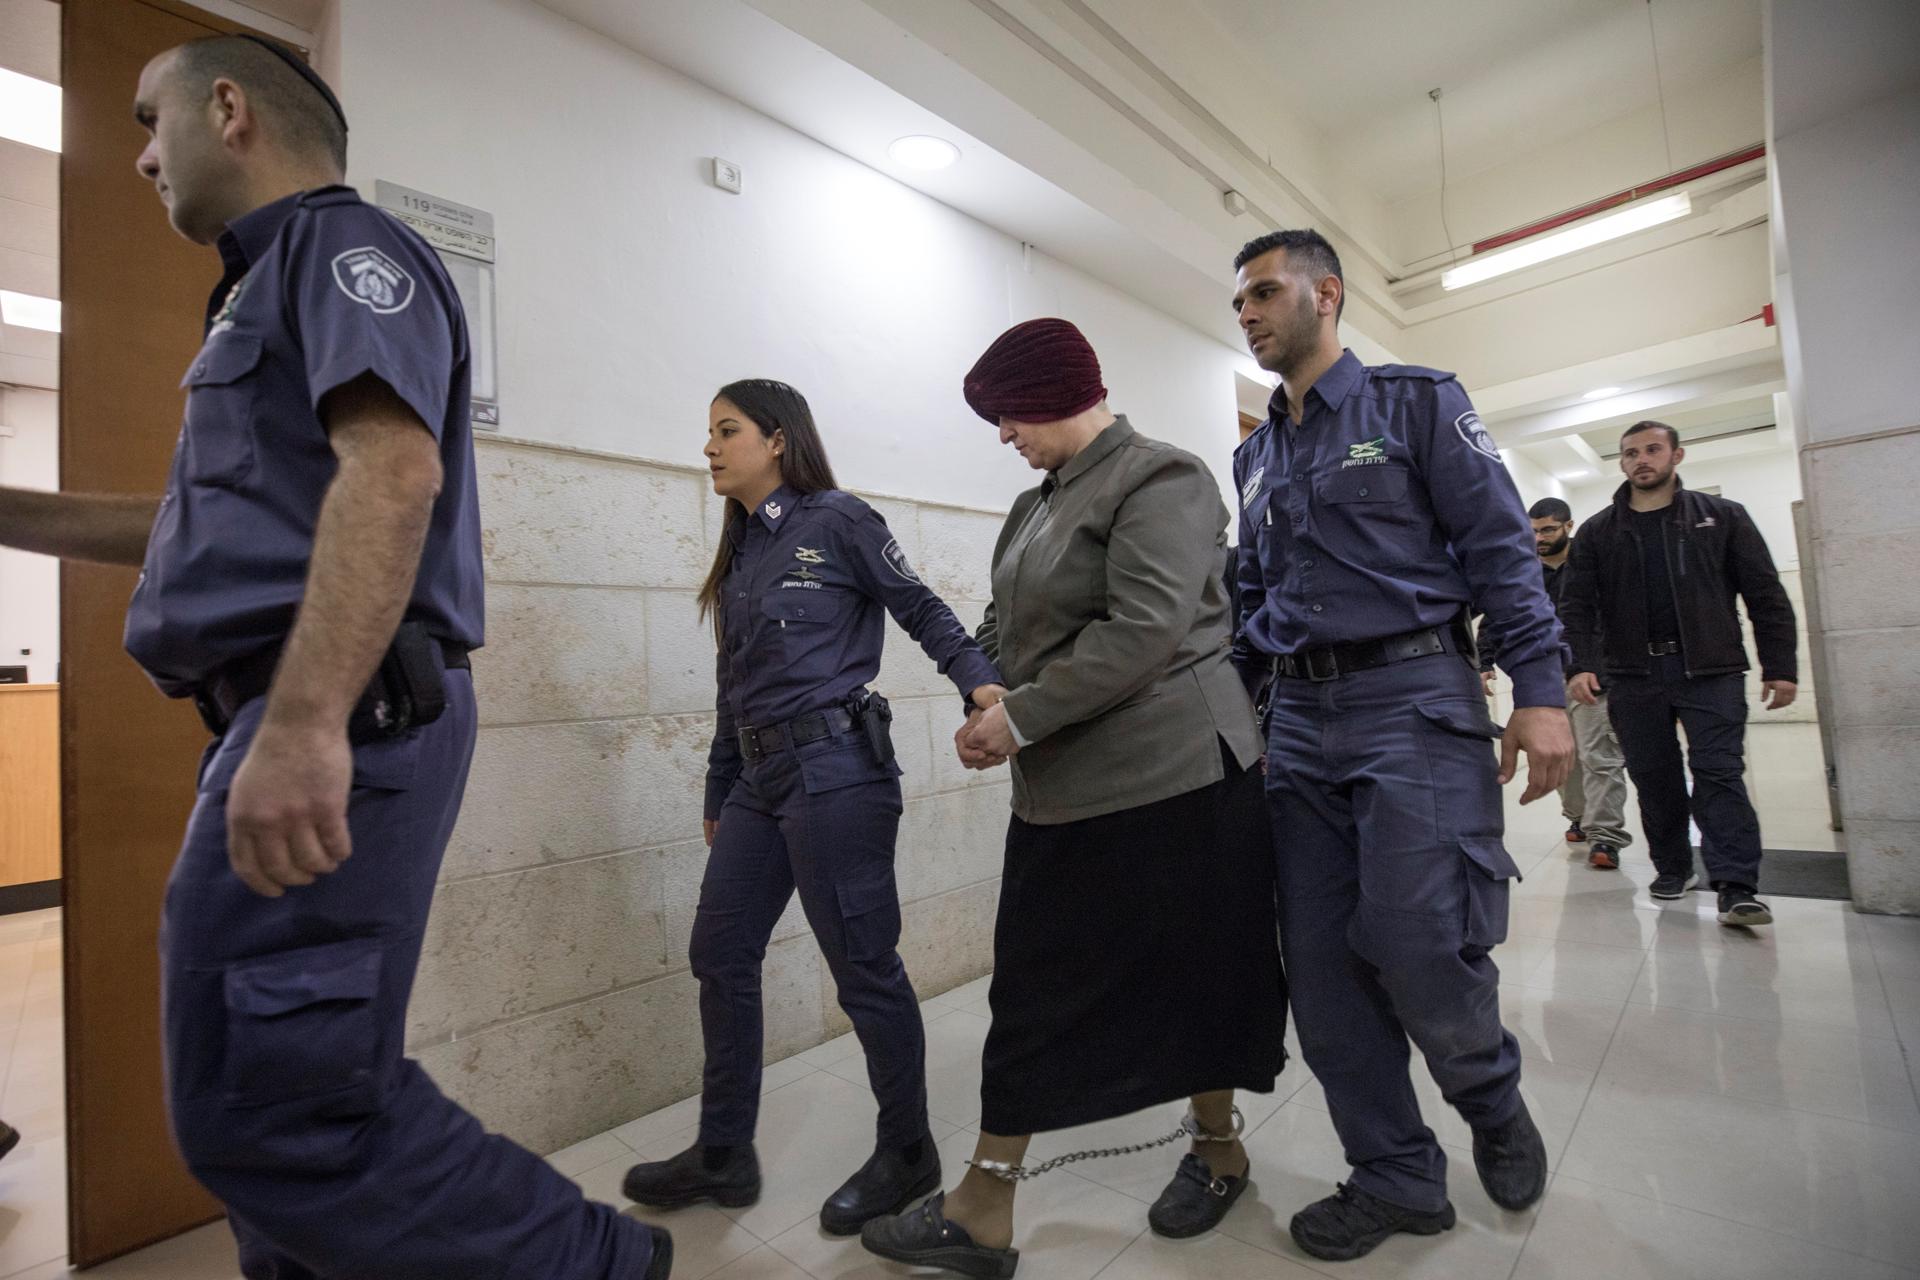 Malka Leifer (C), an ultra-Orthodox Jewish woman, seen handcuffed, as she is brought to Jerusalem District court for a hearing by the Israeli prison service guards, on 27 February 2018. EFE-EPA FILE/ATEF SAFADI